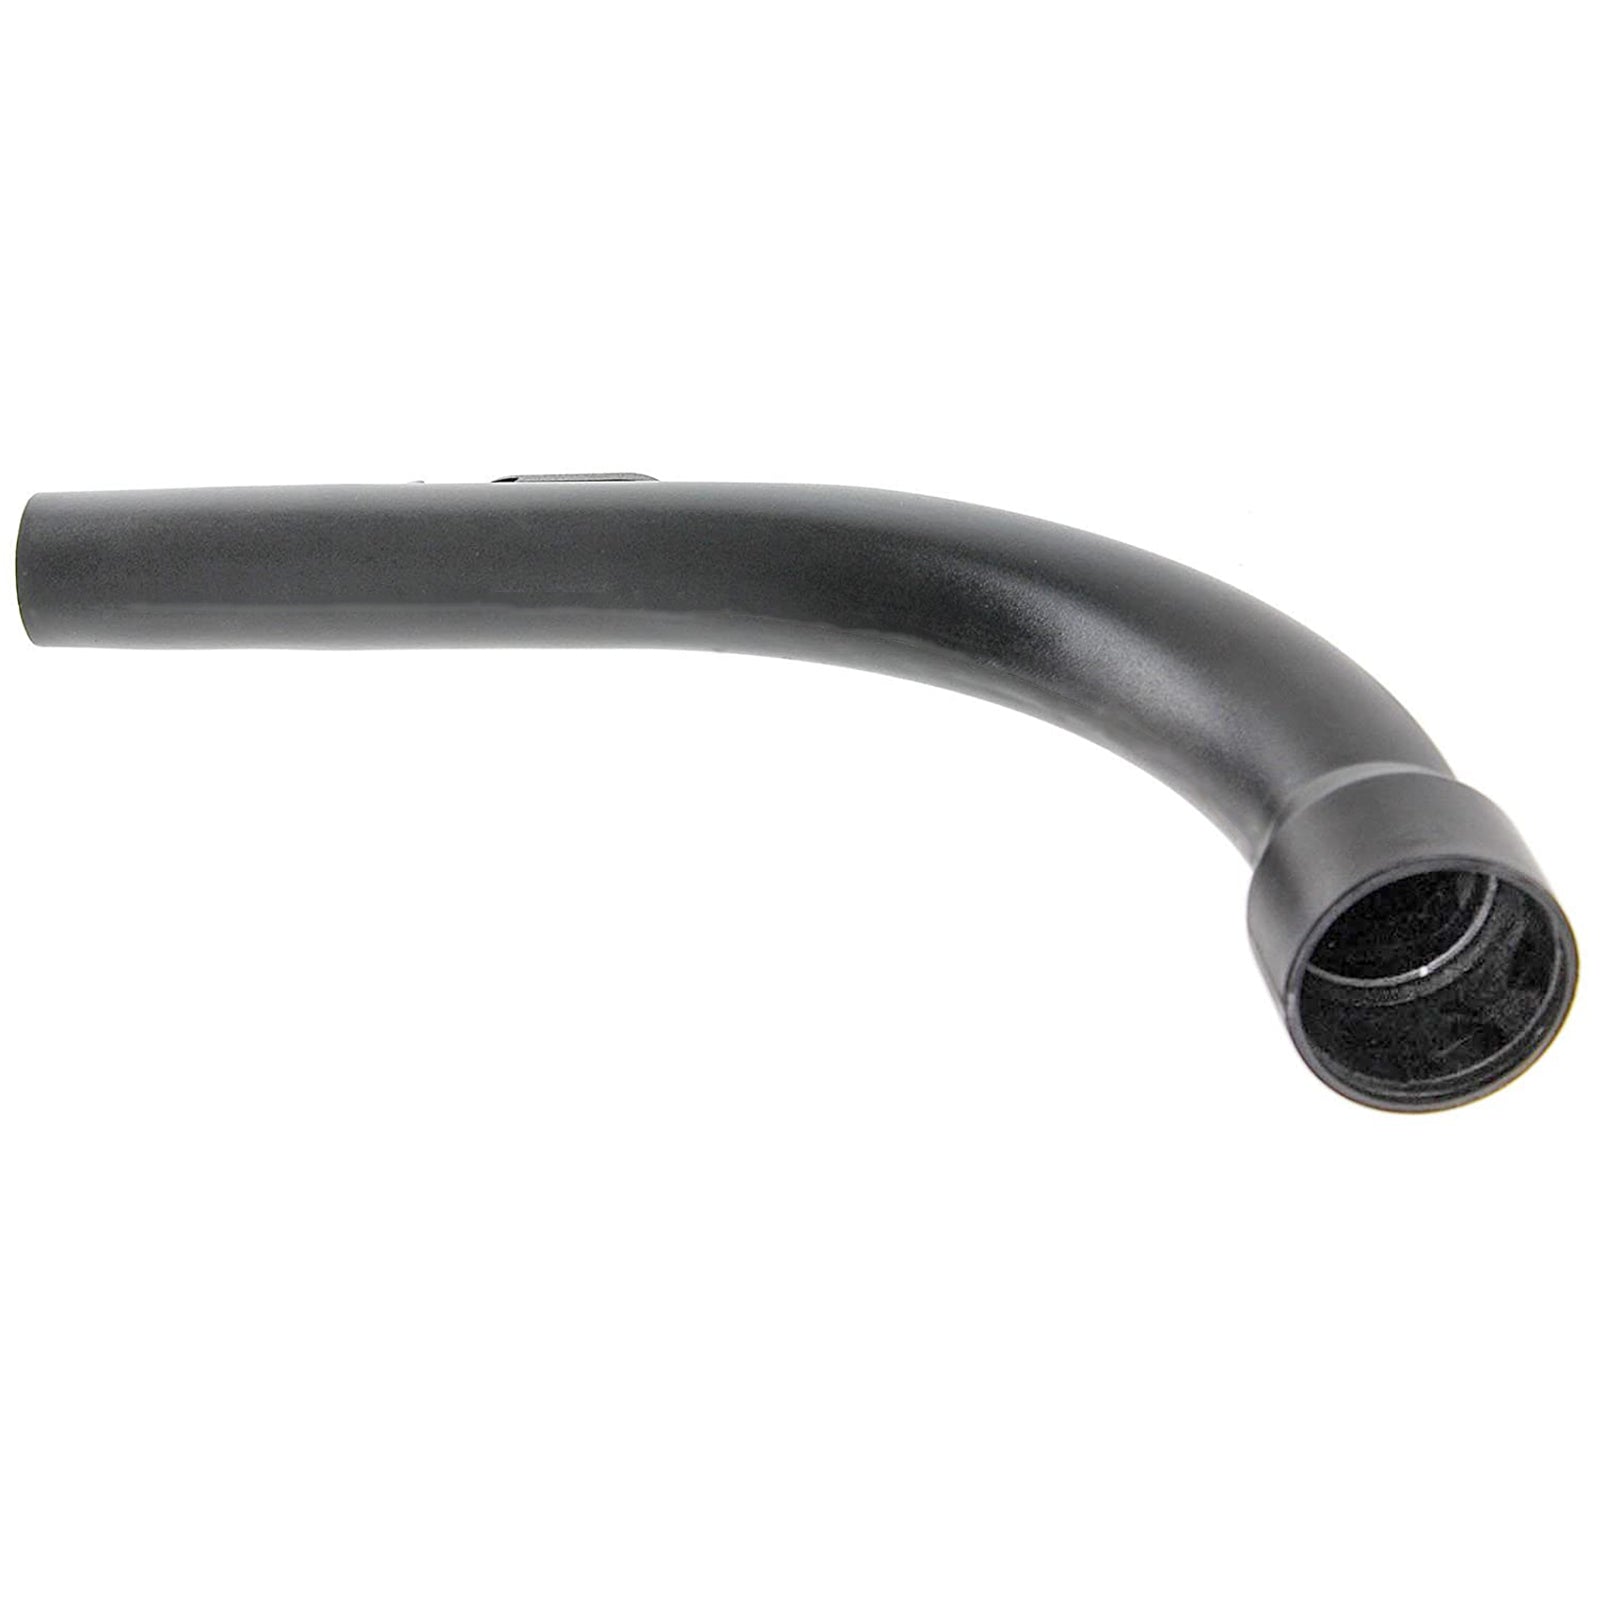 Curved Wand Handle Hose End for Miele S8310 S8320 Cat & Dog S8340 TT5000 Vacuum Cleaner